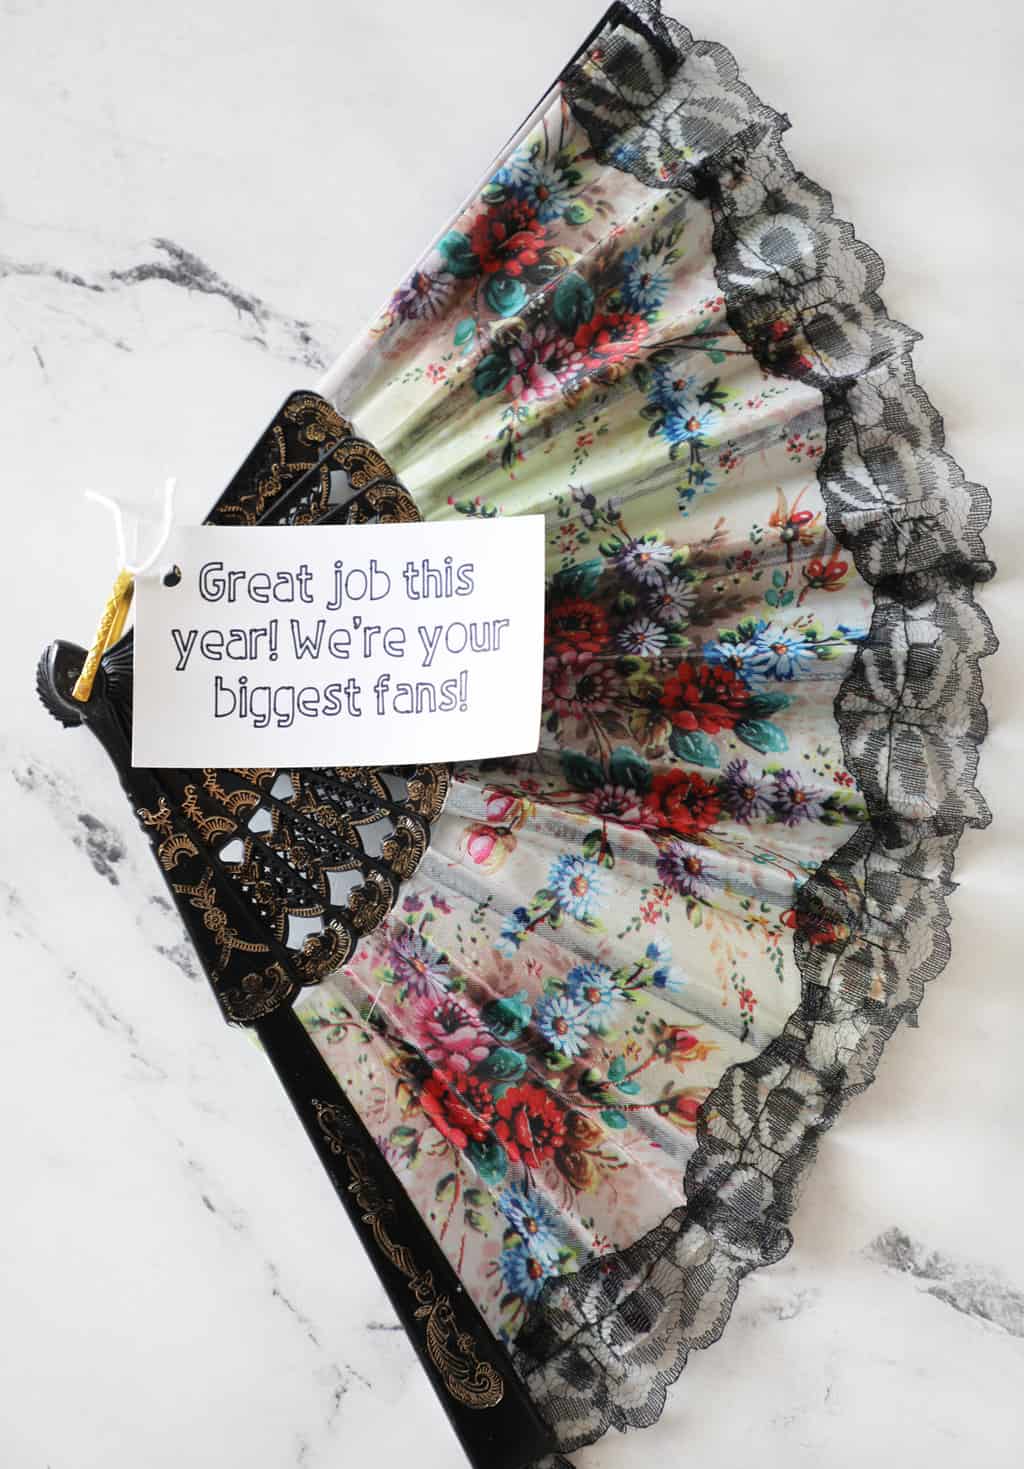 A floral fan spread wide with a white gift tag attached.